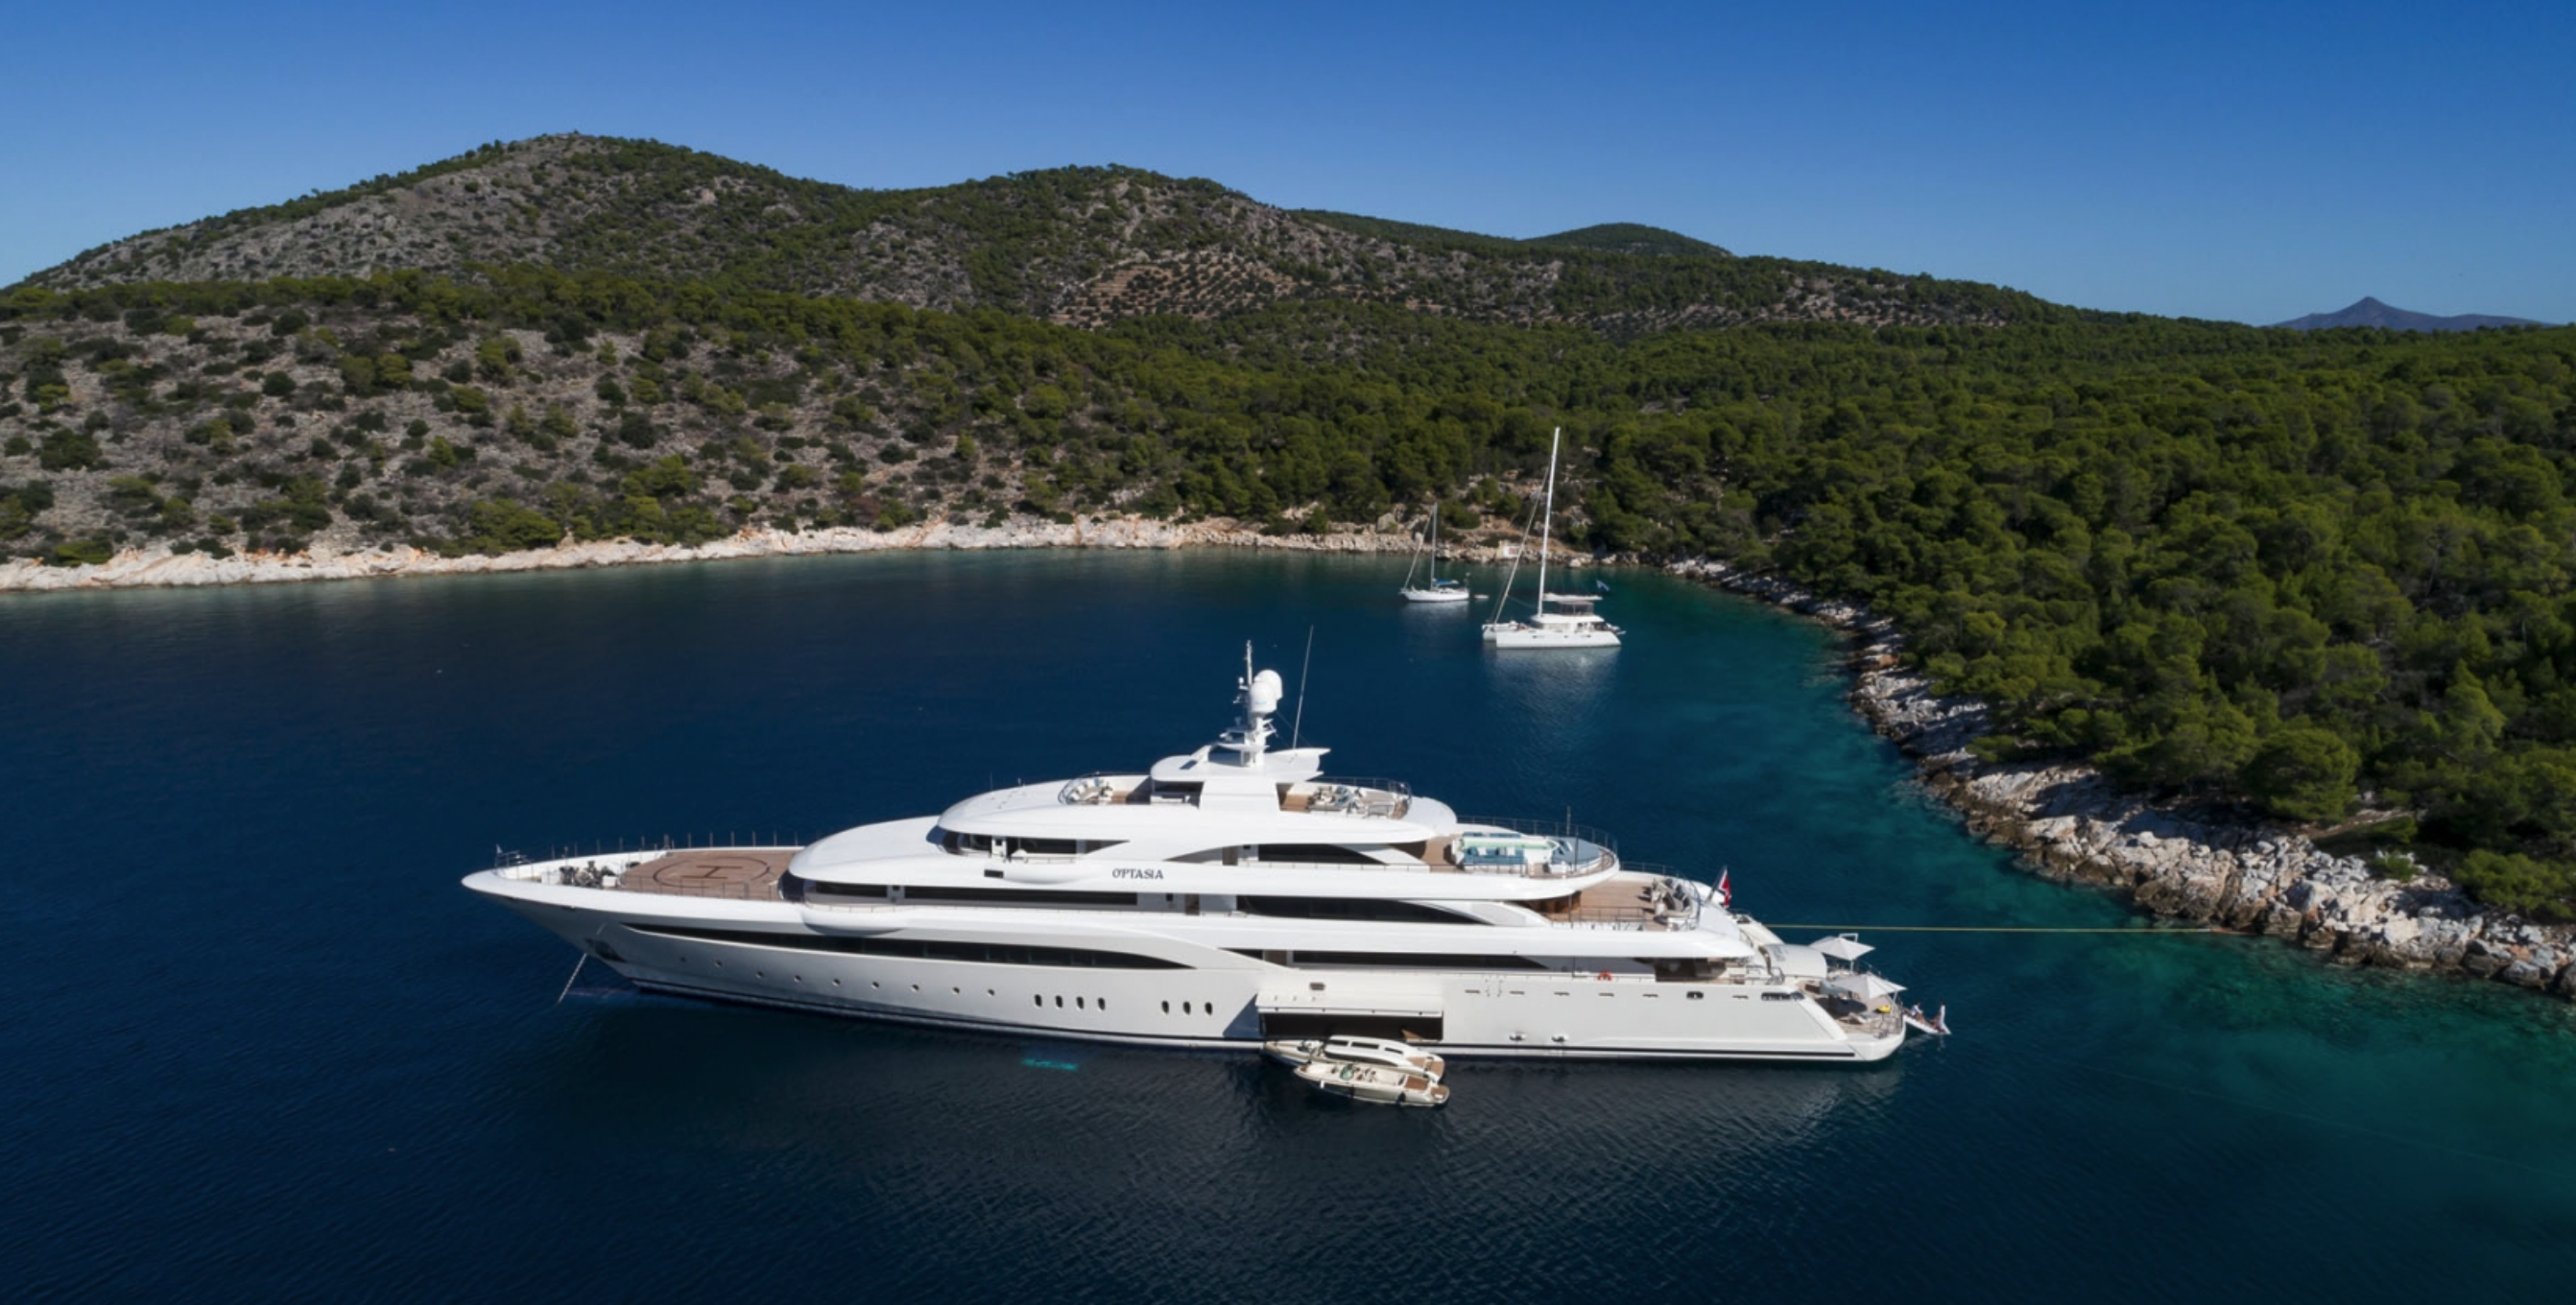 O’Ptasia - Superyacht charter worldwide & Boat hire in East Mediterranean 1